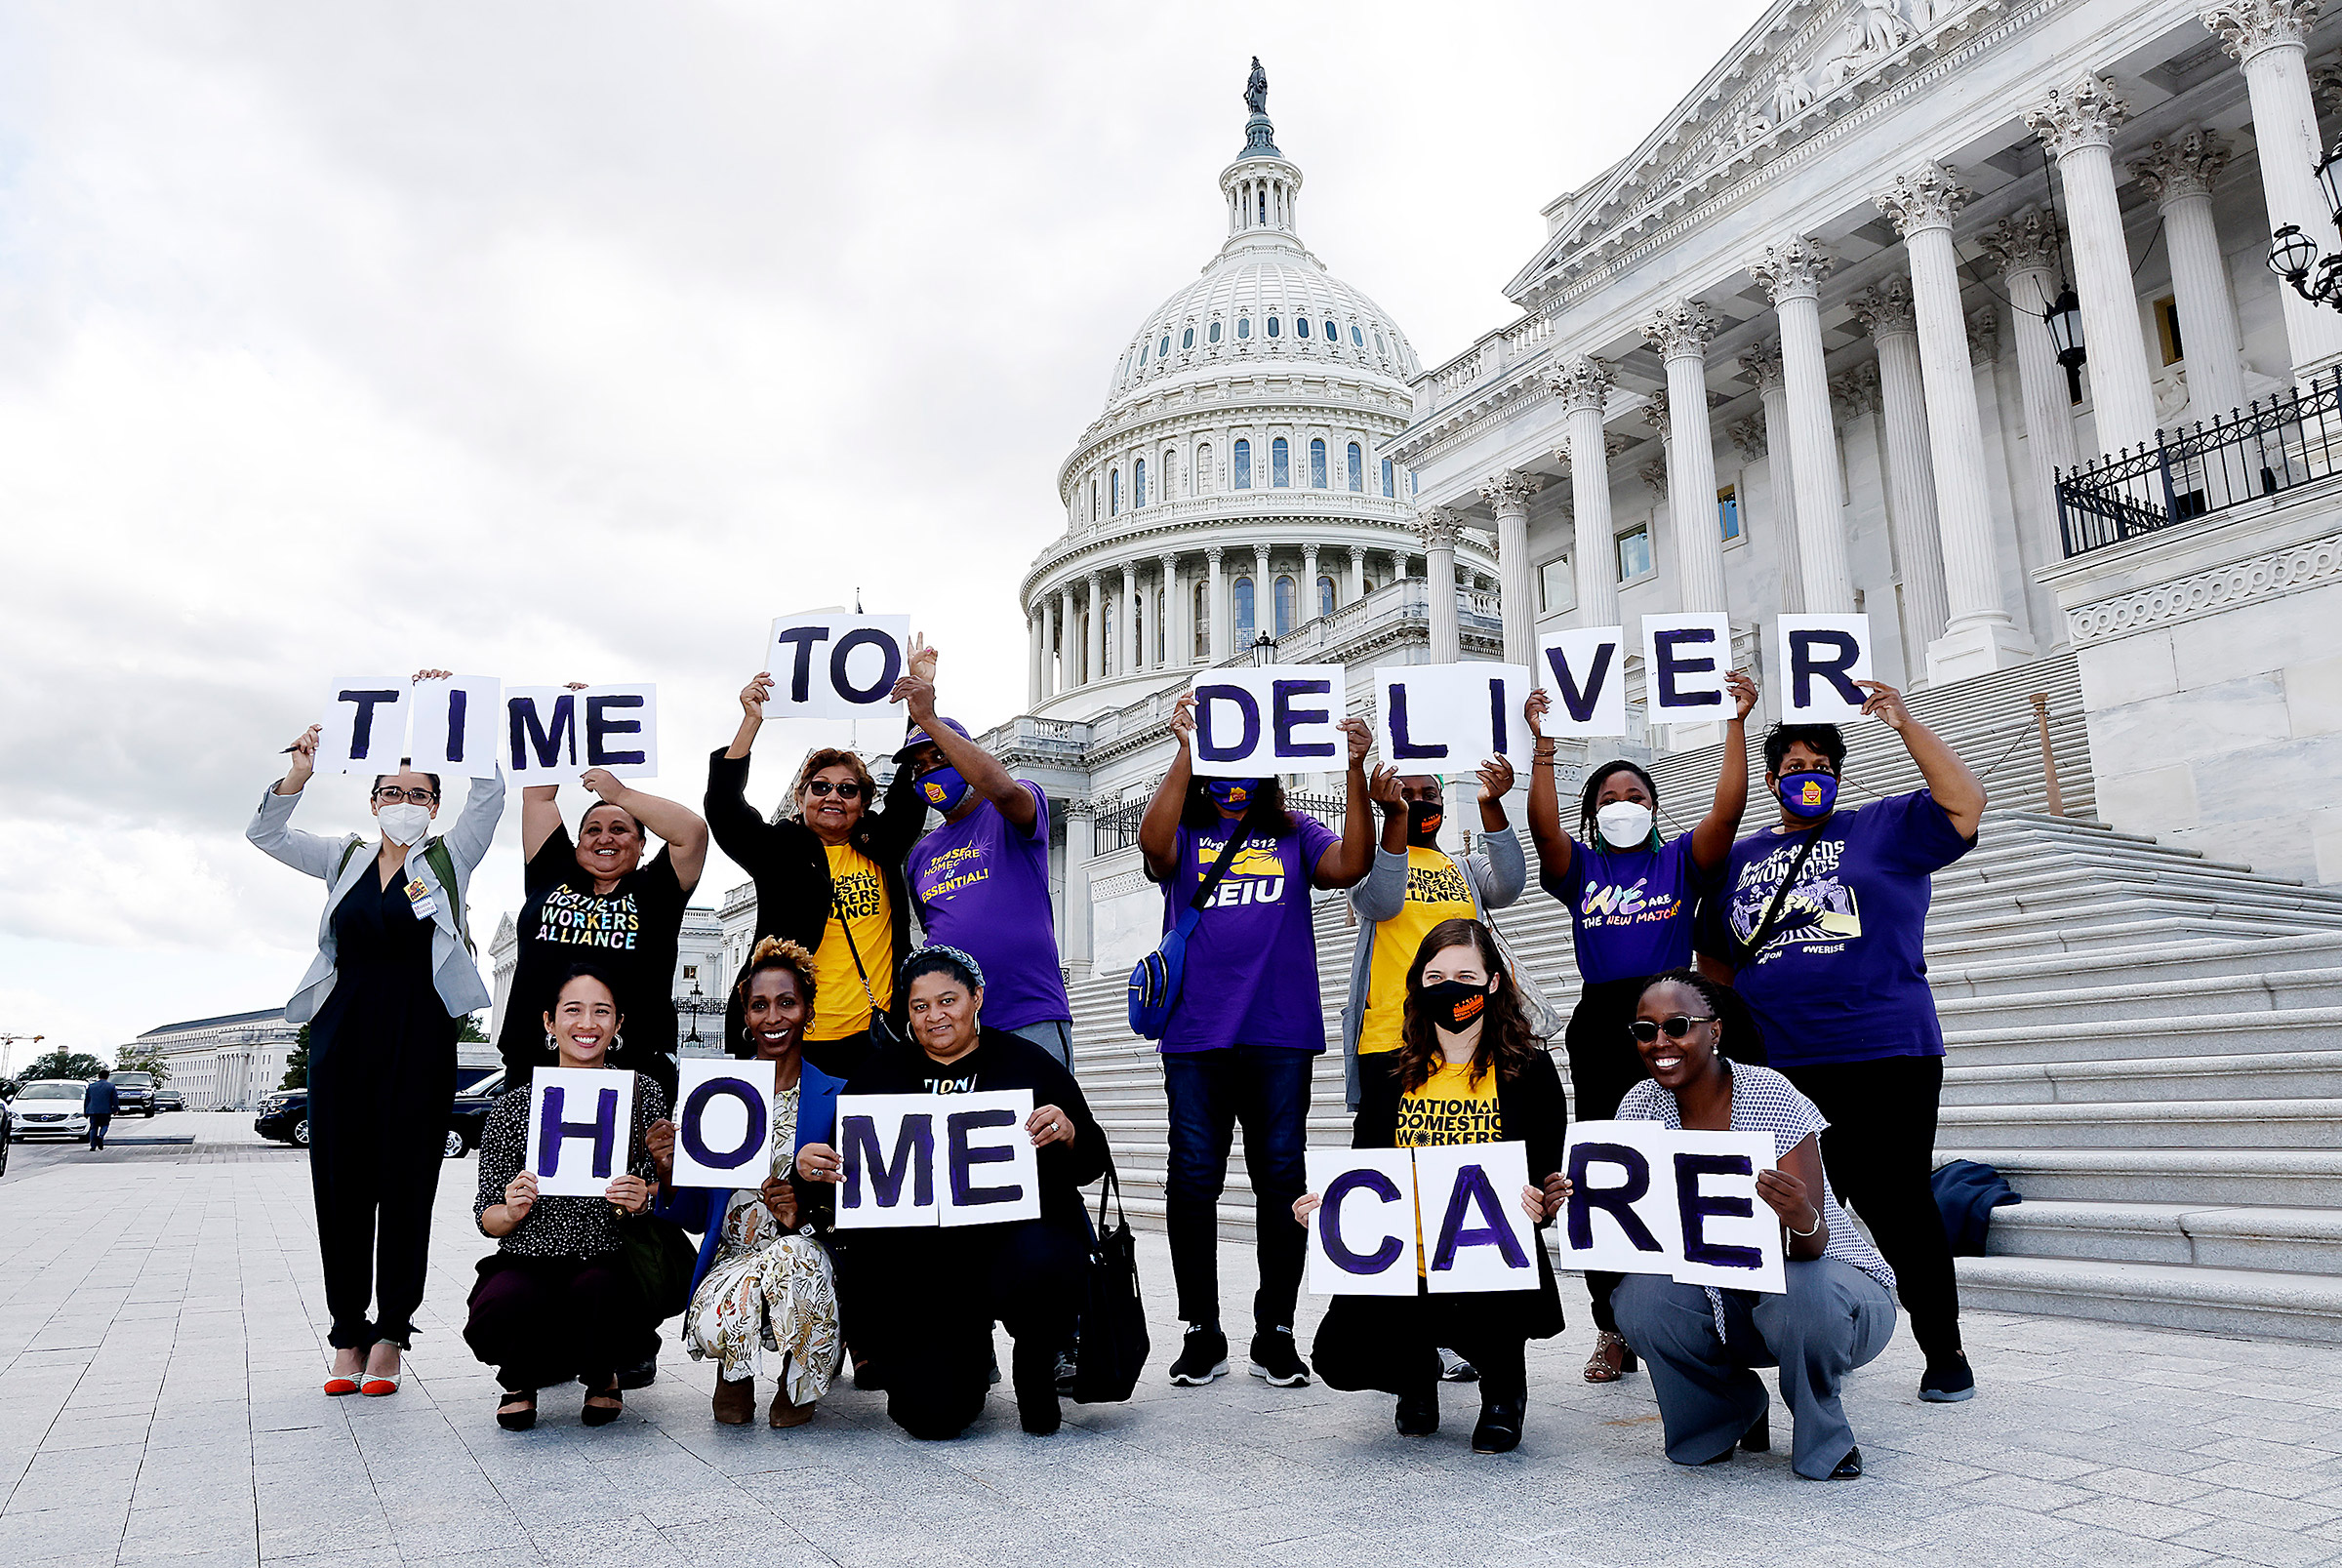 Advocates rally for the Time To Deliver Home Care as part of Build Back Better Act at the Capitol Building in Washington, D.C., on Sept. 23, 2021.